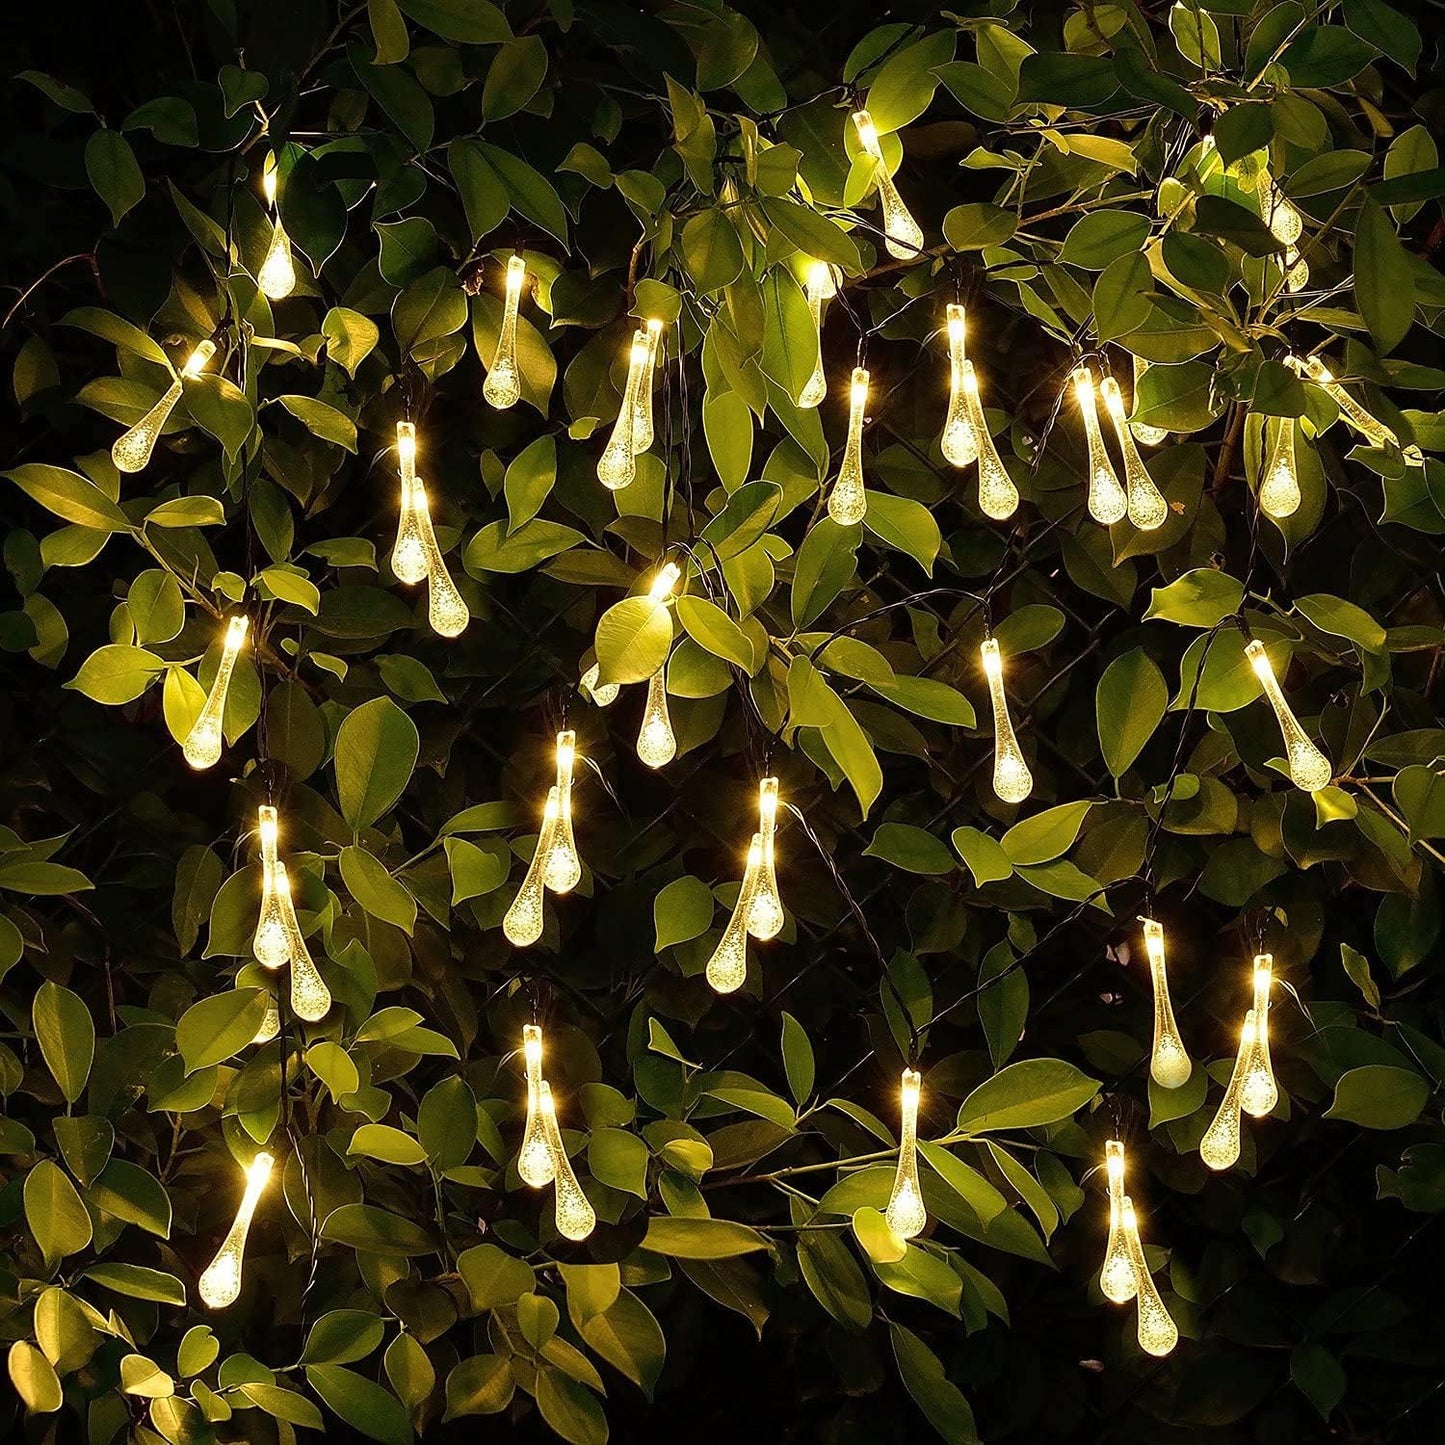 EYUVAA Crystal WaterDrop Shape LED Decorative Fairy Light, 18 Bulb 8 Meter Long LED String Lights for Decoration for Diwali Home, Festival ( White )